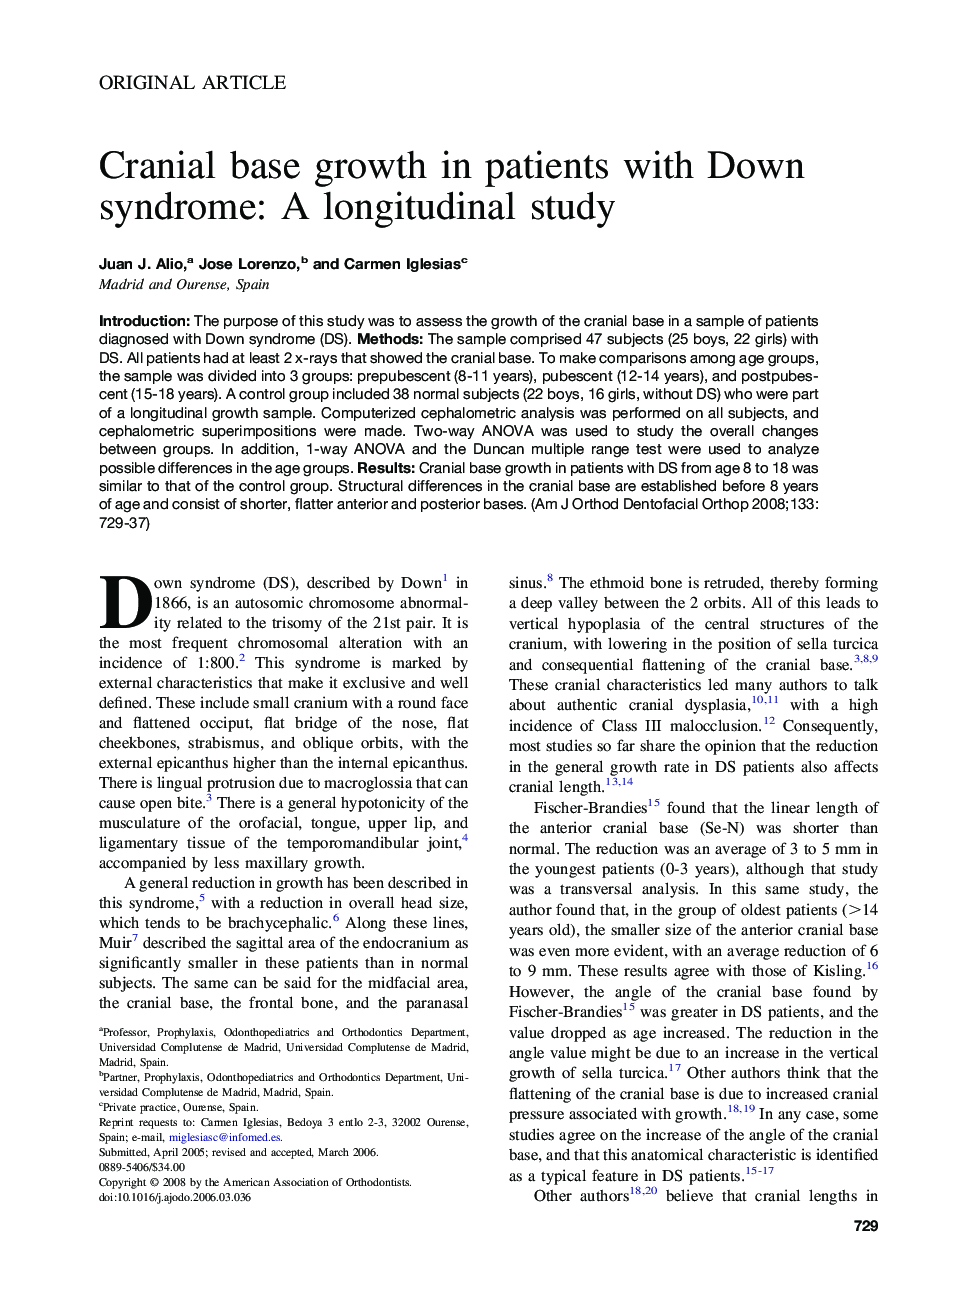 Cranial base growth in patients with Down syndrome: A longitudinal study